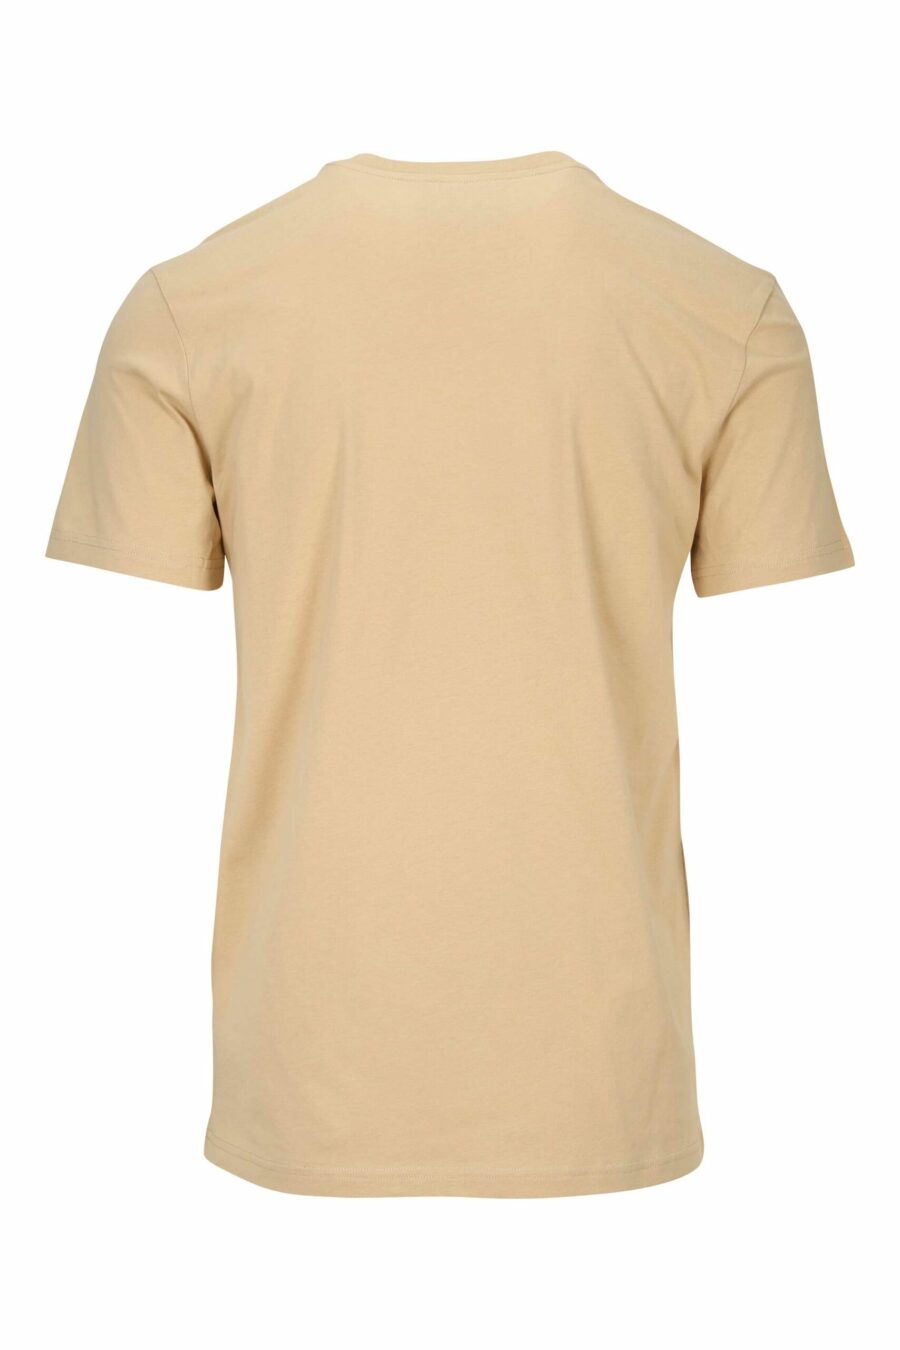 Beige organic cotton T-shirt with classic black maxilogue - 667113391472 1 scaled